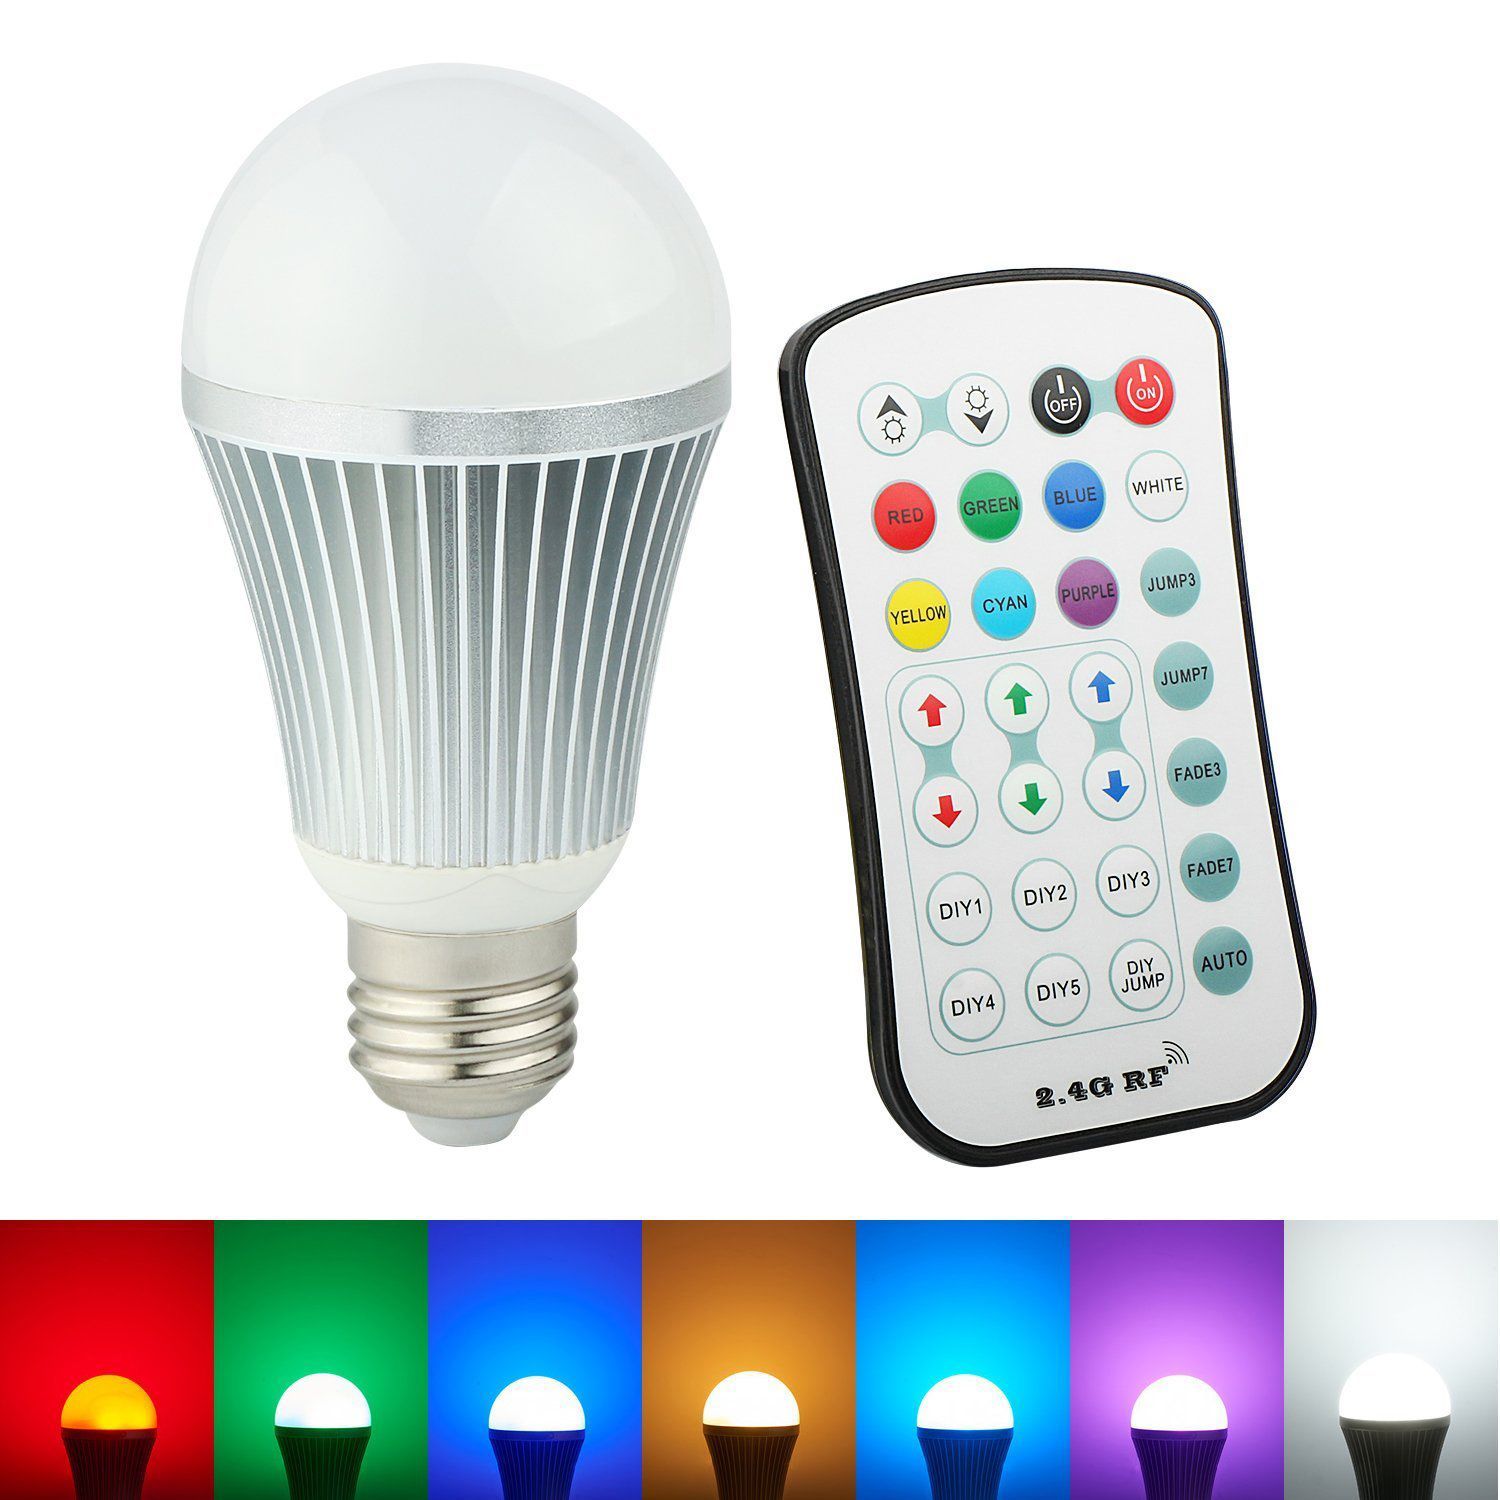 ARILUXreg-E27-9W-Color-Changing-LED-Globe-Light-Bulb-with-24G-Wireless-Remote-Controller-AC85-265V-1131775